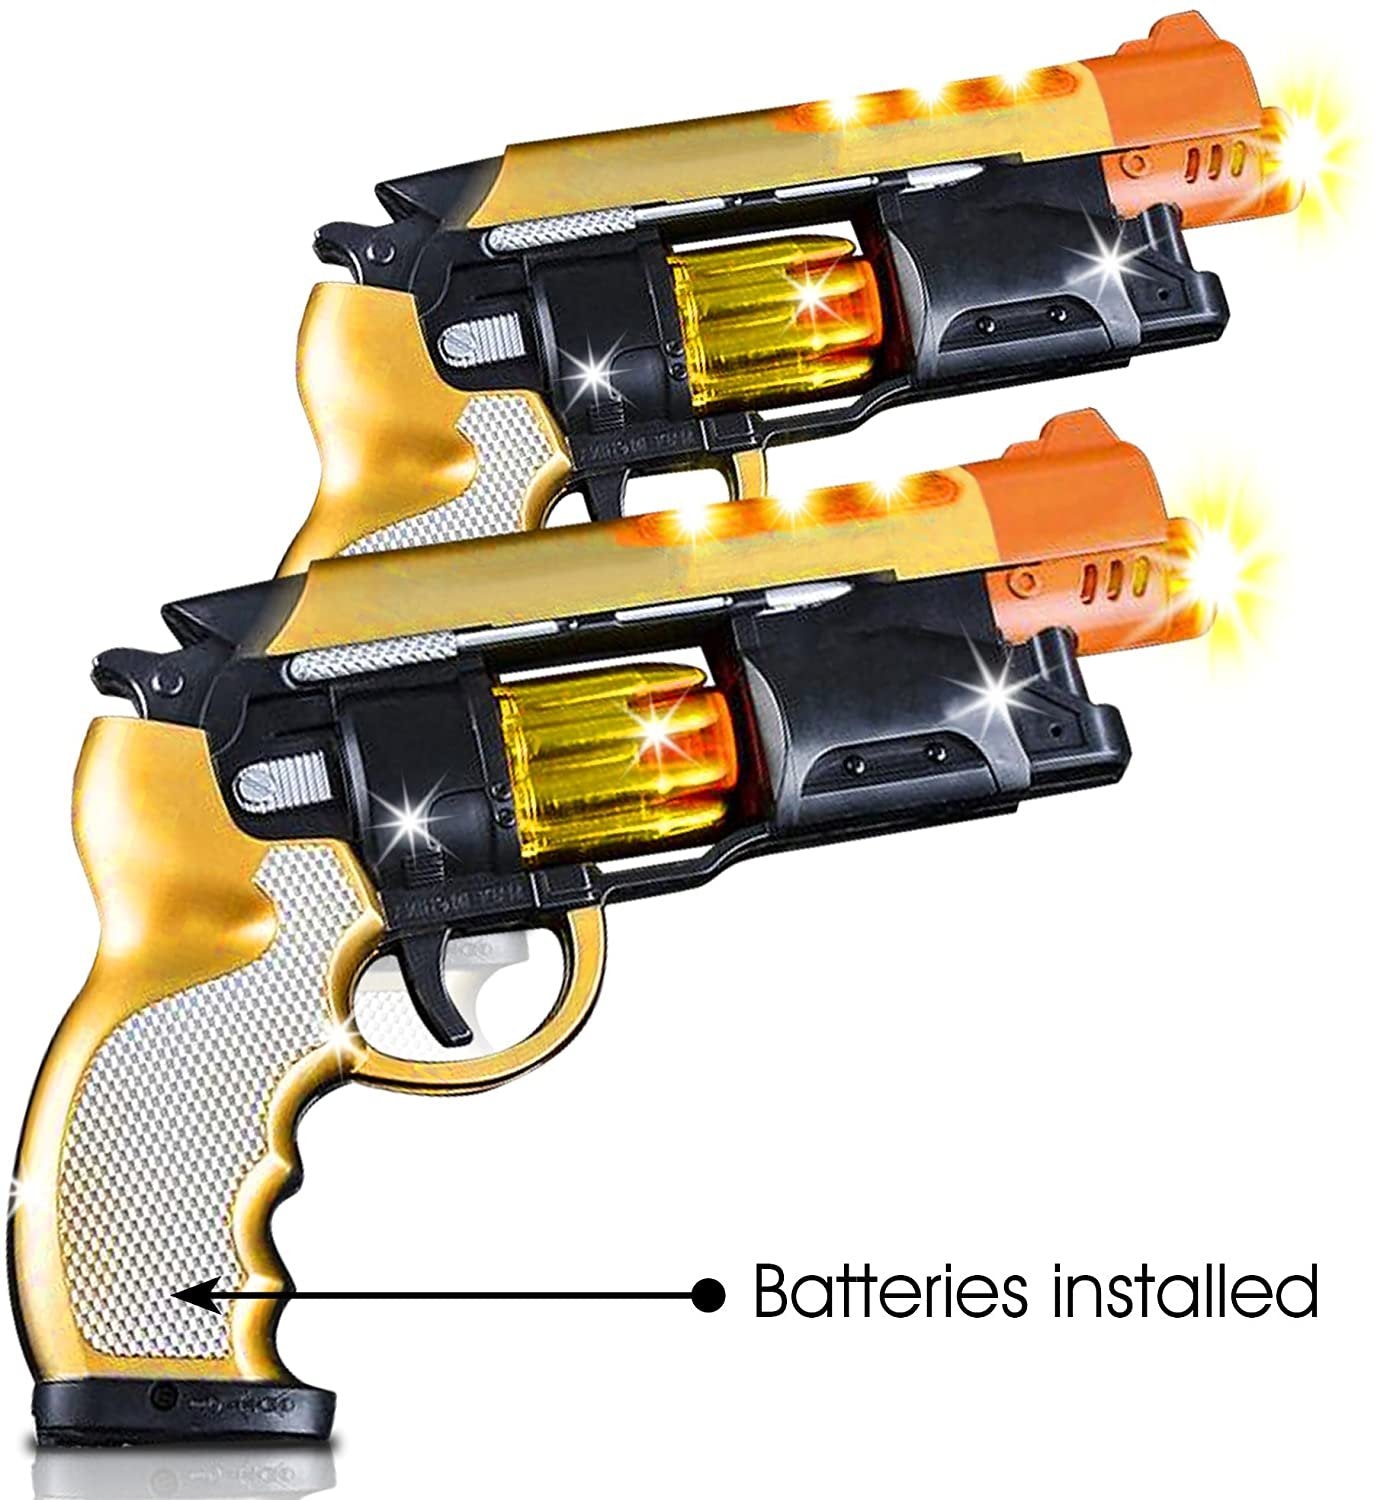 Blade Runner Toy Pistol by ArtCreativity Toy Gun for Kids with LED and Sound Effects, Design, Batteries Included, Sturdy Plastic Design, Great Gift Idea for Boys and Girls - 2 Pistols